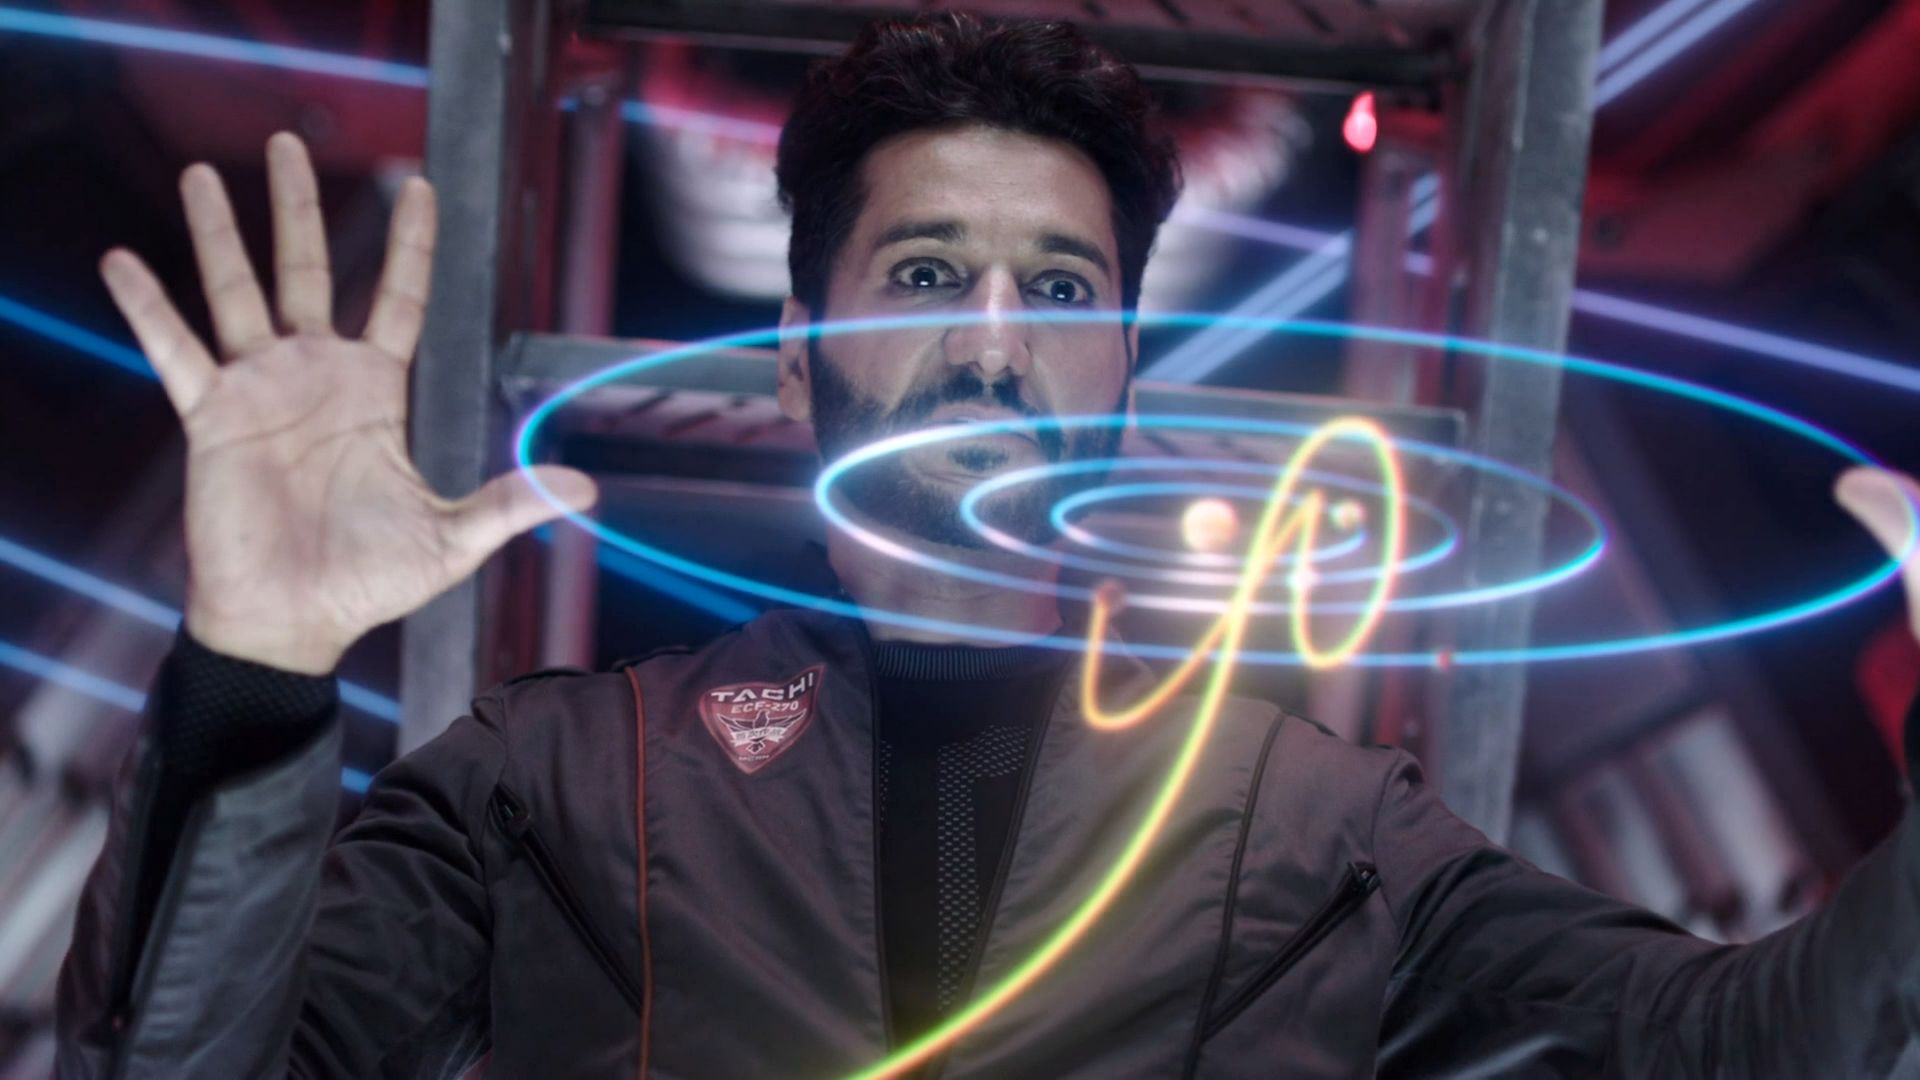 The Expanse S2E11 Here There Be Dragons